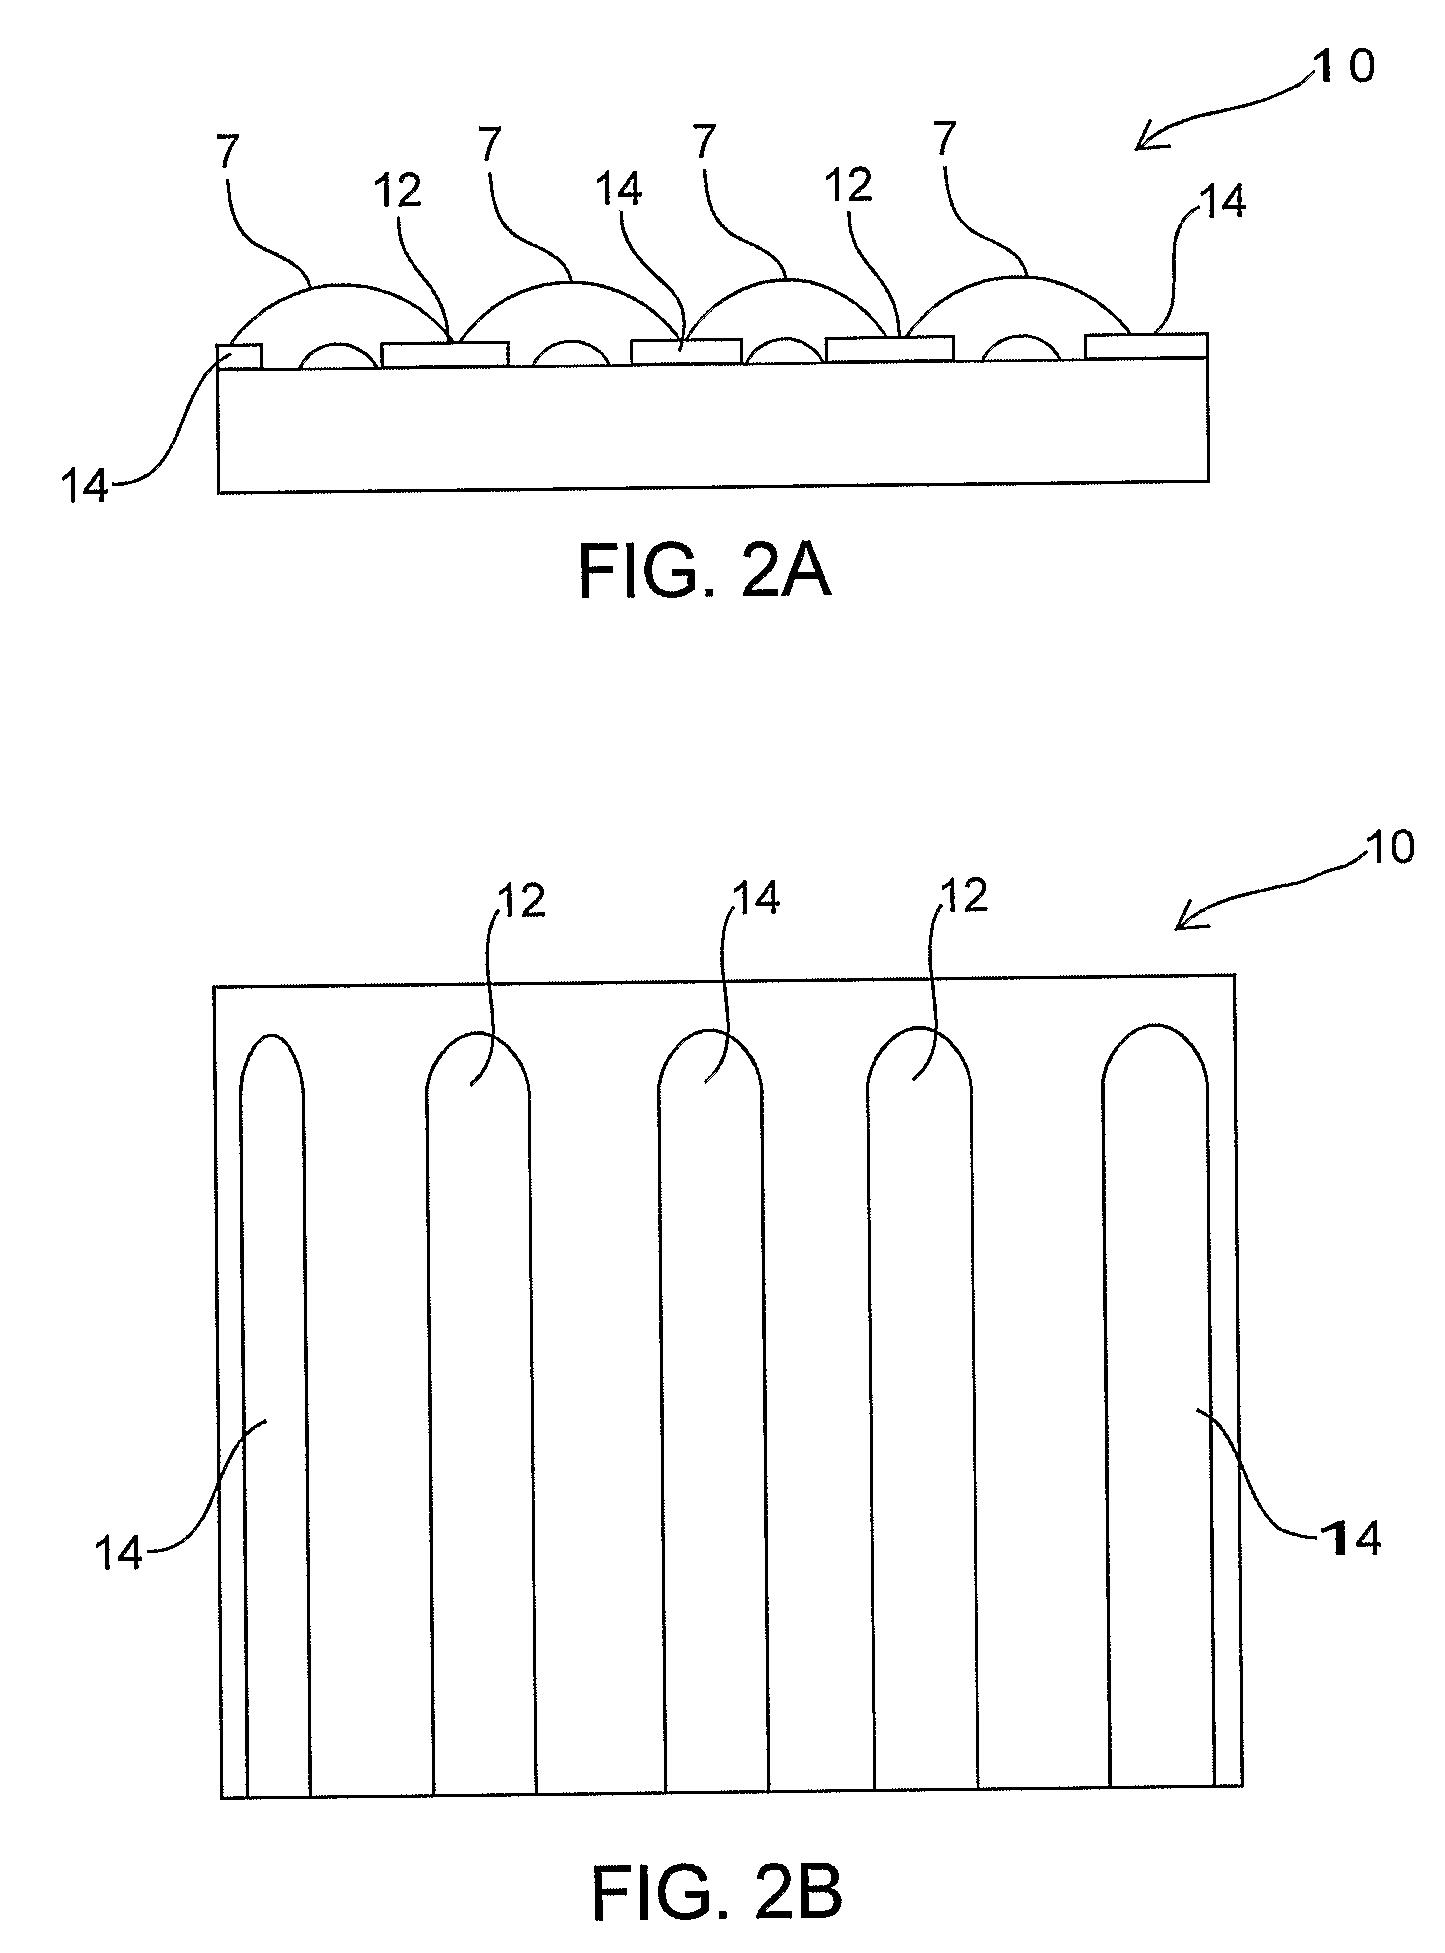 Methods and devices for the non-thermal, electrically-induced closure of blood vessels